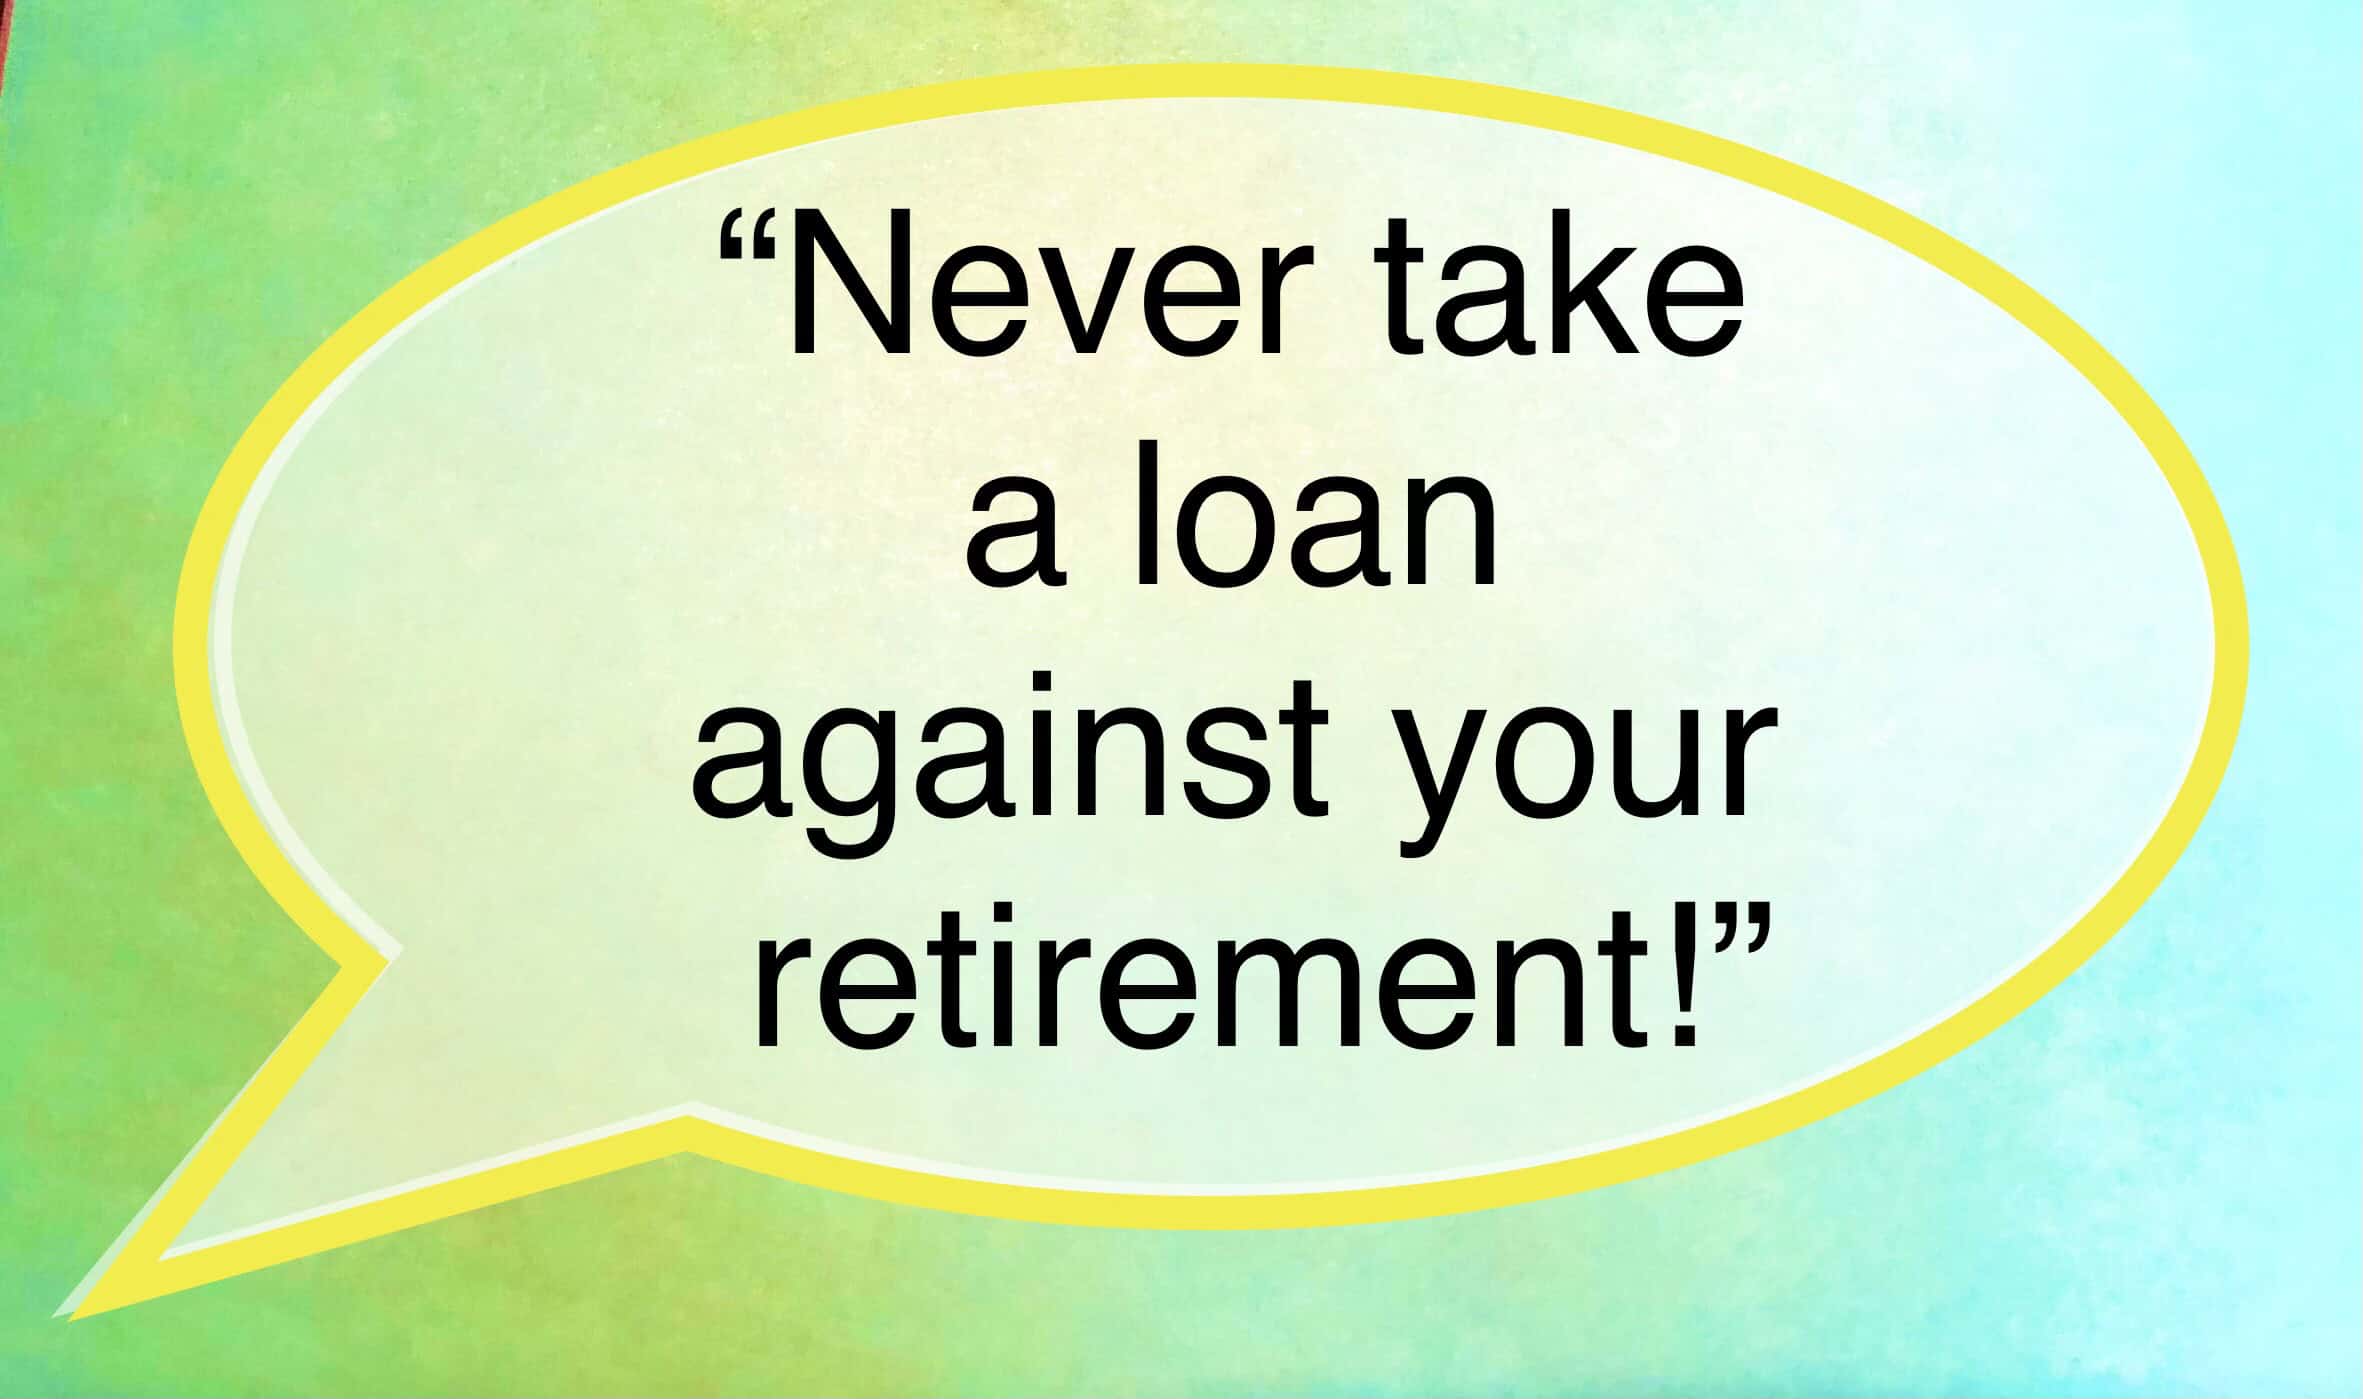 <ul> <li>Never take a loan against your retirement! When you pay interest against your retirement, you cost yourself interest. -Dave Ramsey</li> </ul> <p>of the advice on 24/7 Wall St.'s list of the 8 times Dave Ramsey nailed it with savings advice, this is one of the most important! Borrowing against your retirement can have significant downsides. Taking money out of retirement funds comes with fees, interest, and tax implications. Borrowing against retirement savings interrupts the compounding growth potential of those funds, hindering their ability to generate returns over time. While it may provide short-term financial relief, borrowing against your retirement should be a last resort due to the long-term consequences on your retirement readiness.</p> <p>Agree with this? Hit the Thumbs Up button above. Disagree? Let us know in the comments with what you'd change.</p>